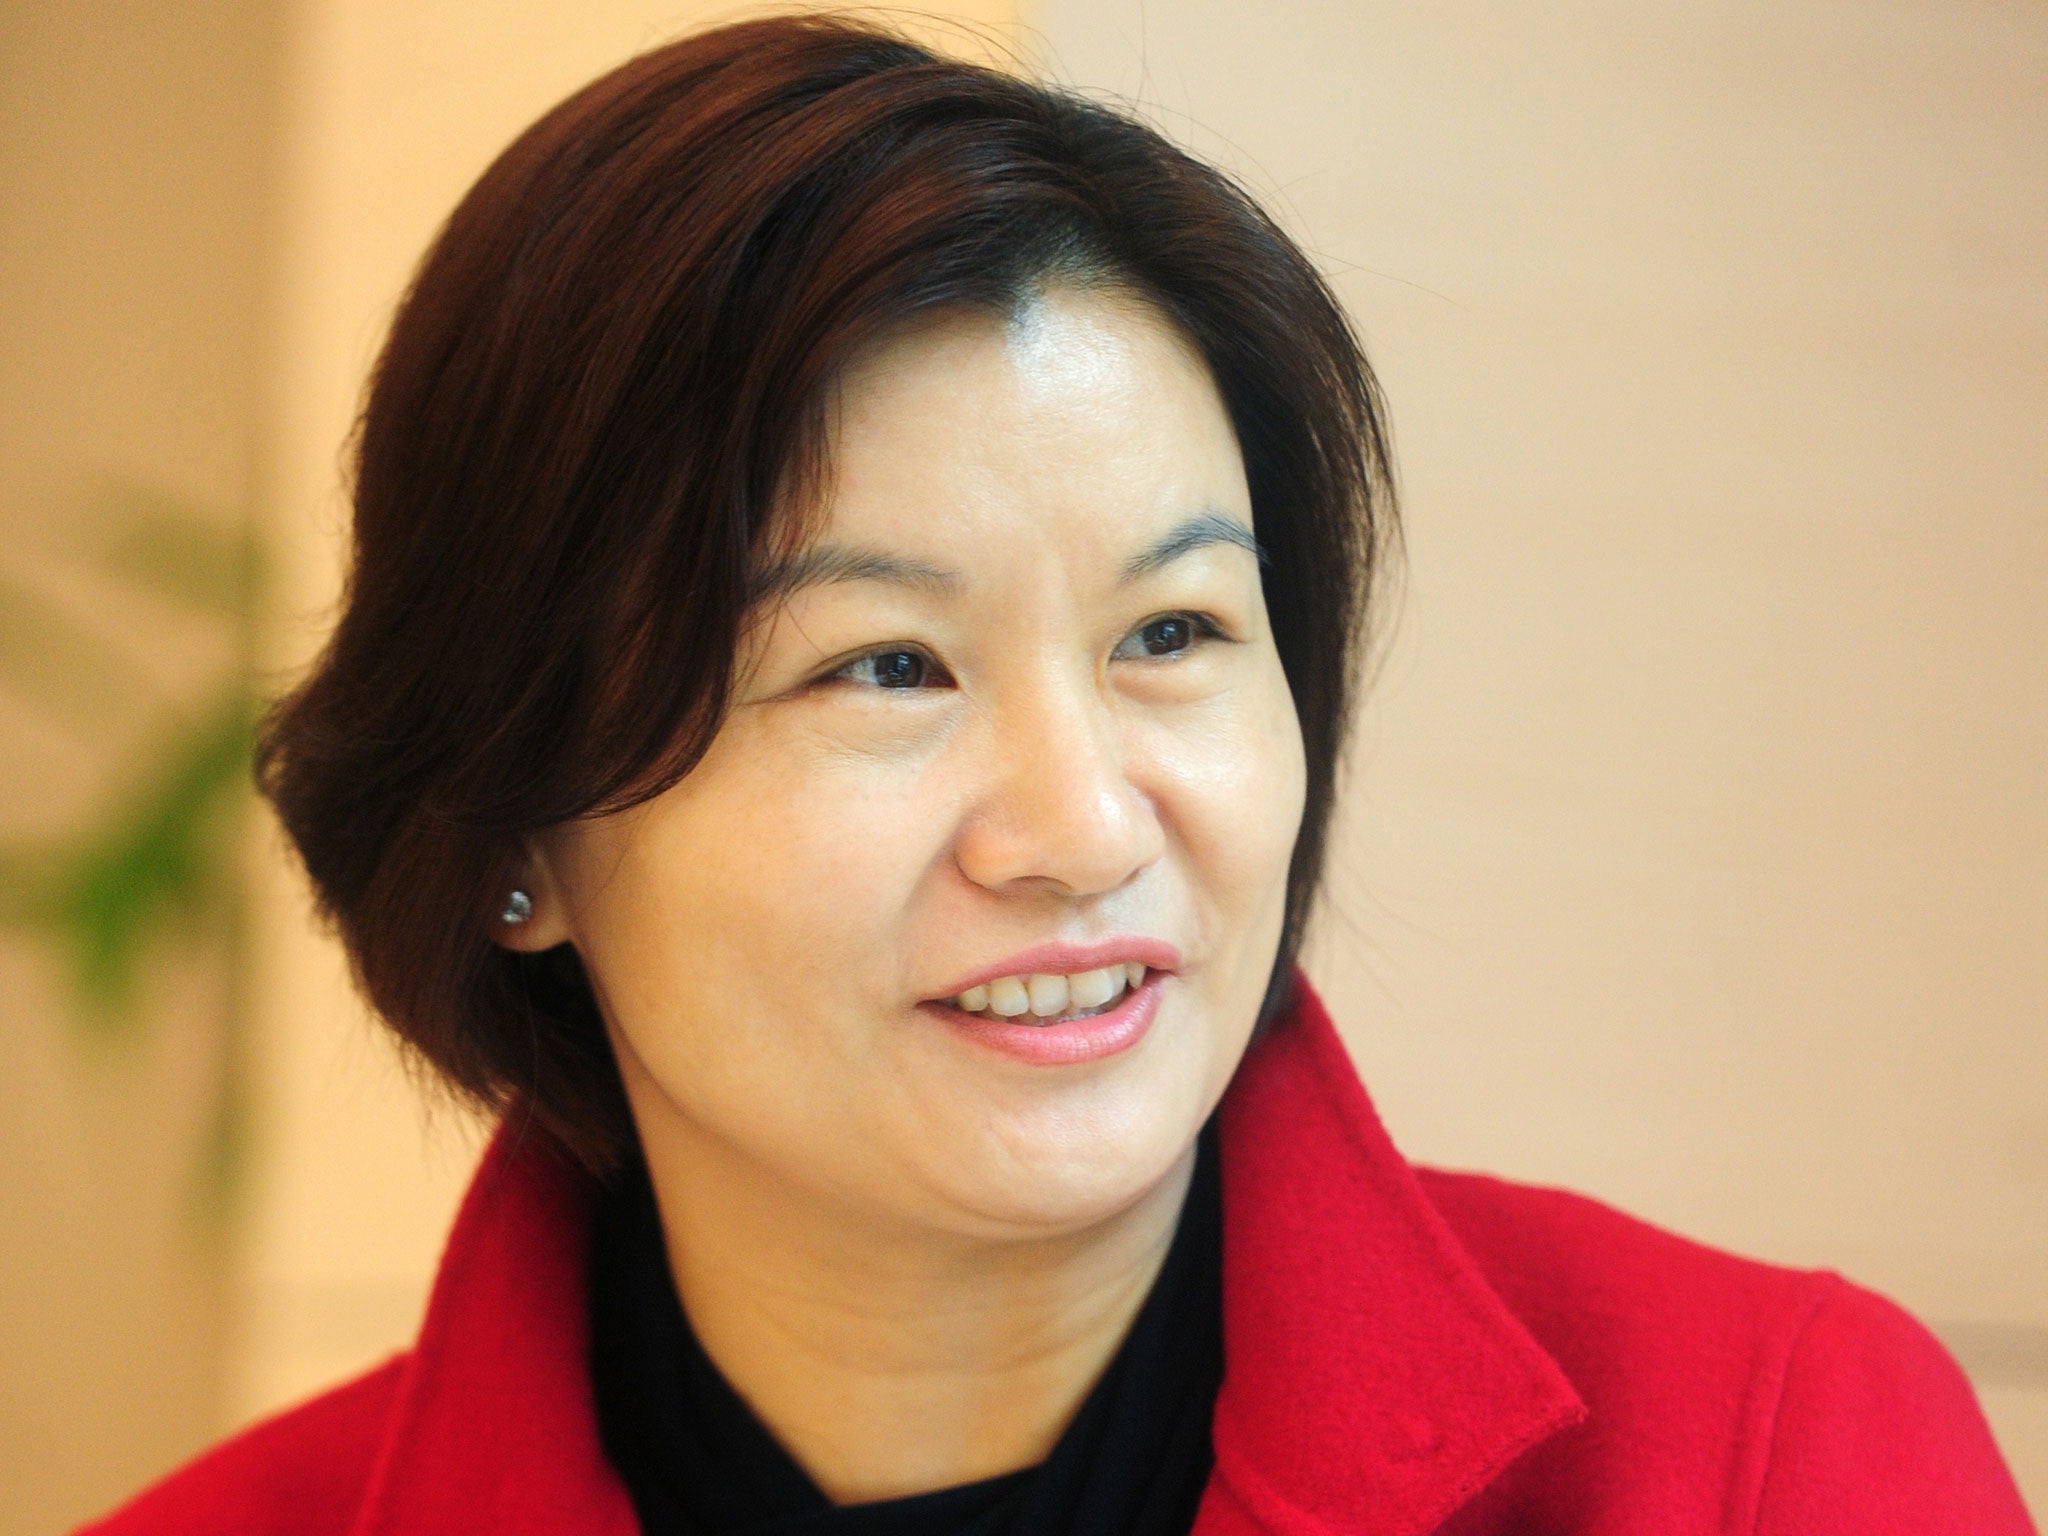 Zhou Qunfei, a former factory worker who founded Lens Technology, a company supplying Apple, Samsung and other technological giants with touchscreen glass has become China's richest woma in April 2015 , with a fortune surpassing $8 billion